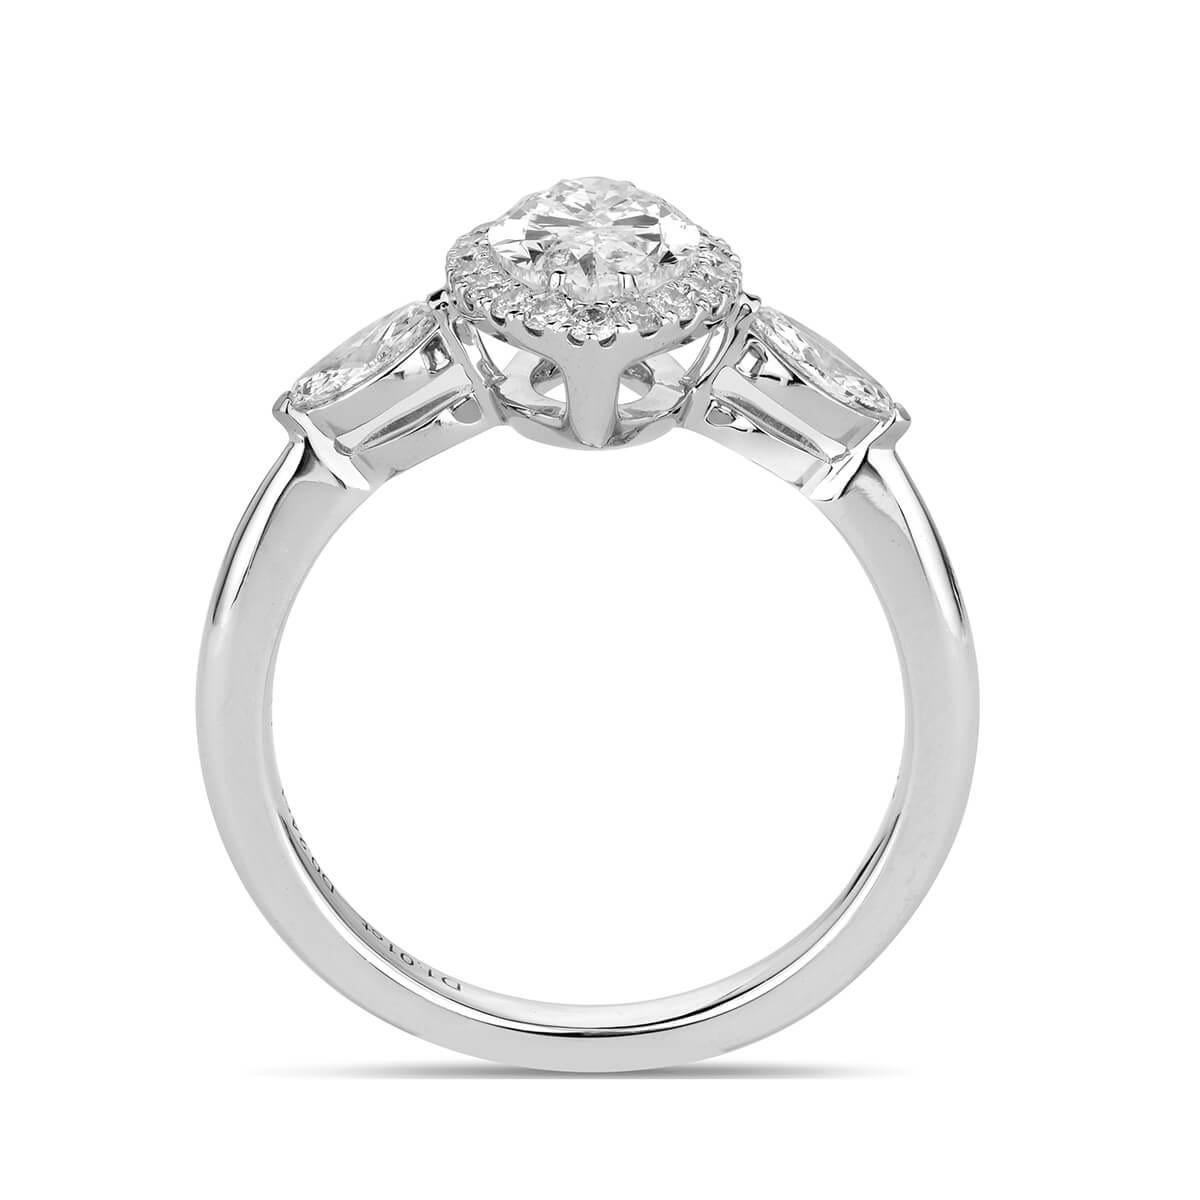 Marquise Cut GIA Certified Natural Untreated 1.43 Carat White Diamond Engagement Wedding Ring For Sale